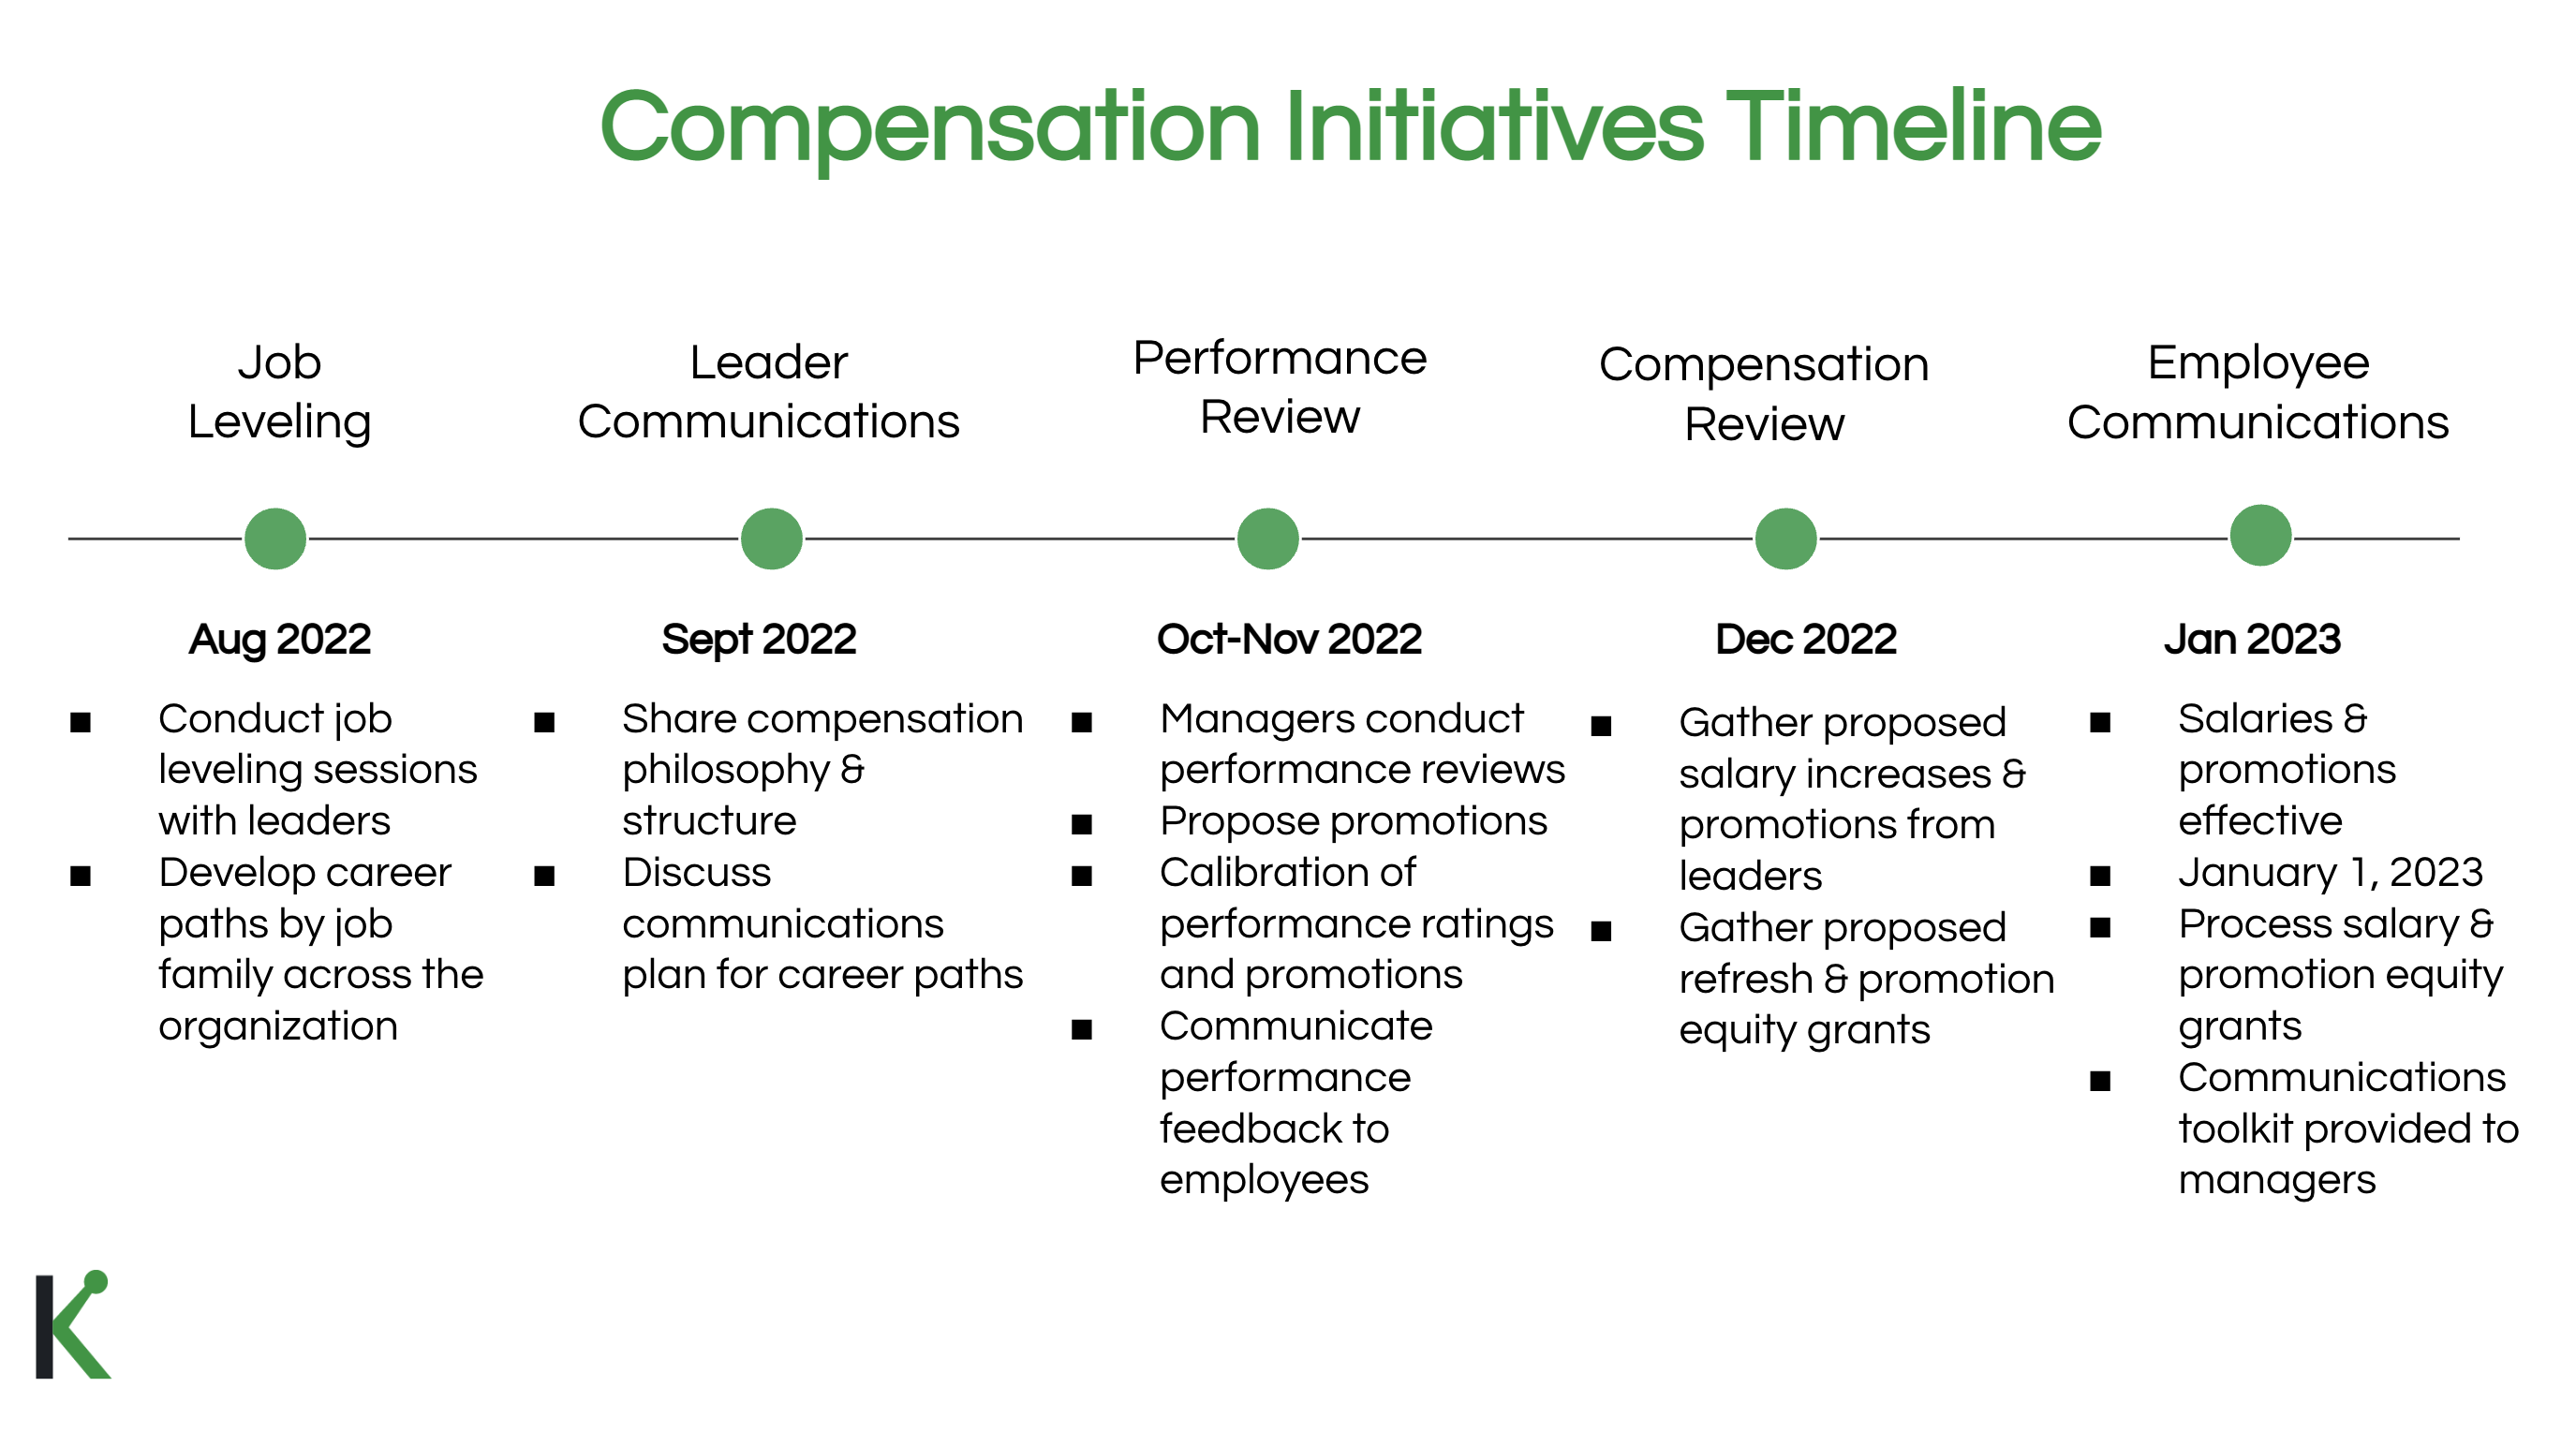 Compensation Initiatives Timelines (in chronological order) include Job Leveling, Leader Communications, Performance Review, Compensation Review, and Employee Communications. Job Leveling: conduct job leveling sessions with leaders and develop career paths by job family across the organization. Leader Communications: share compensation philosophy & structure, discuss communications plan for career paths. Performance Review: managers conduct performance reviews, propose promotions, calibration of performance ratings and promotions, and communicate performance feedback to employees. Compensation Review: gather proposed salary increases & promotions from leaders, and gather proposed refresh & promotions equity grants. Employee Communications: salaries & promotions effective, process salary & promotions equity grants, communications toolkit provided to managers.